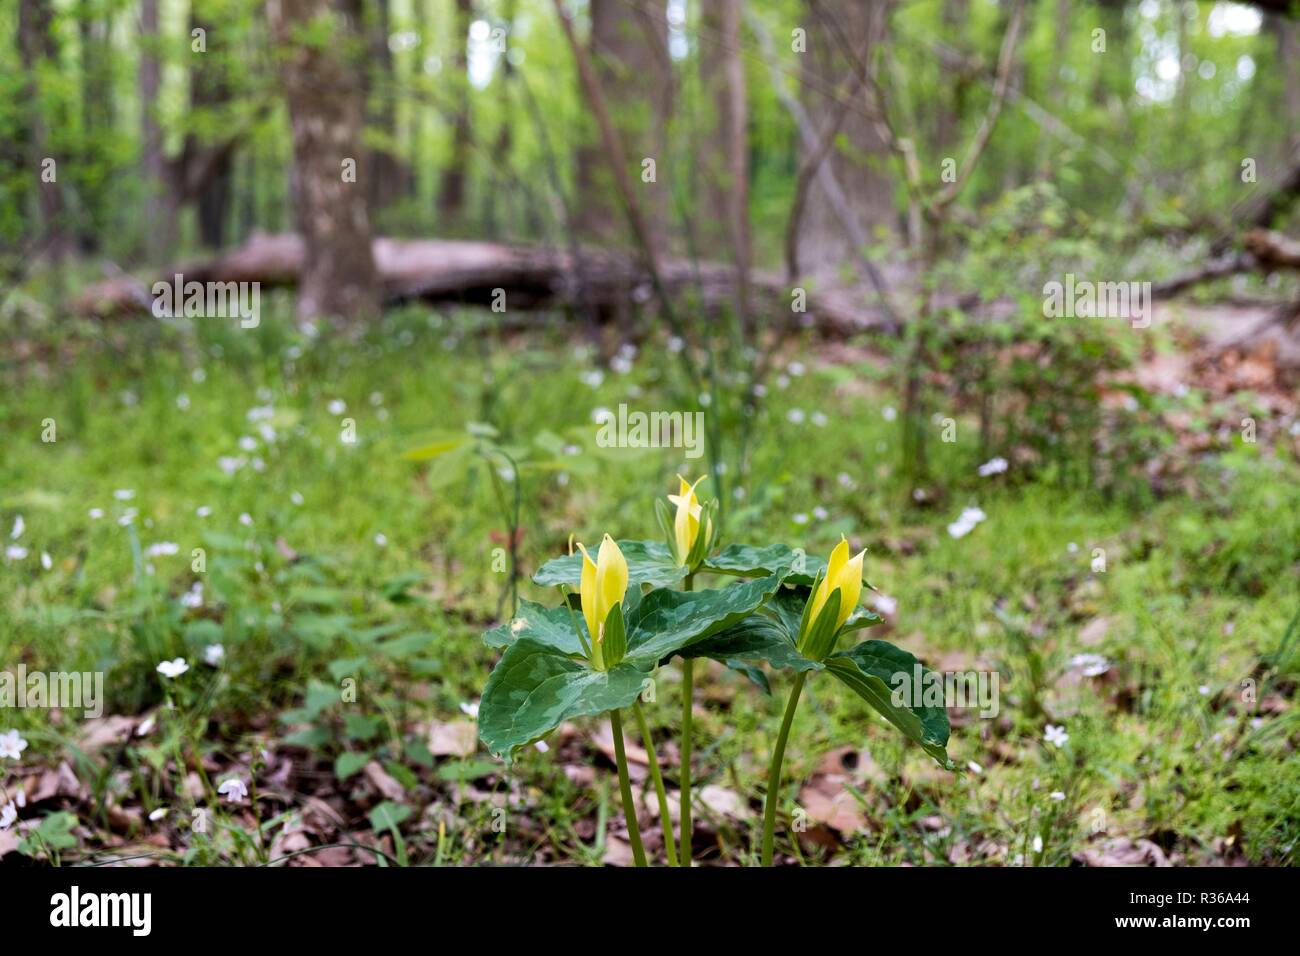 Trillium luteum or Yellow Trillium with native plants and flowers, Bowmans Hill Wildflower Preserve, New Hope, Bucks County, Pennsylvania, Stock Photo